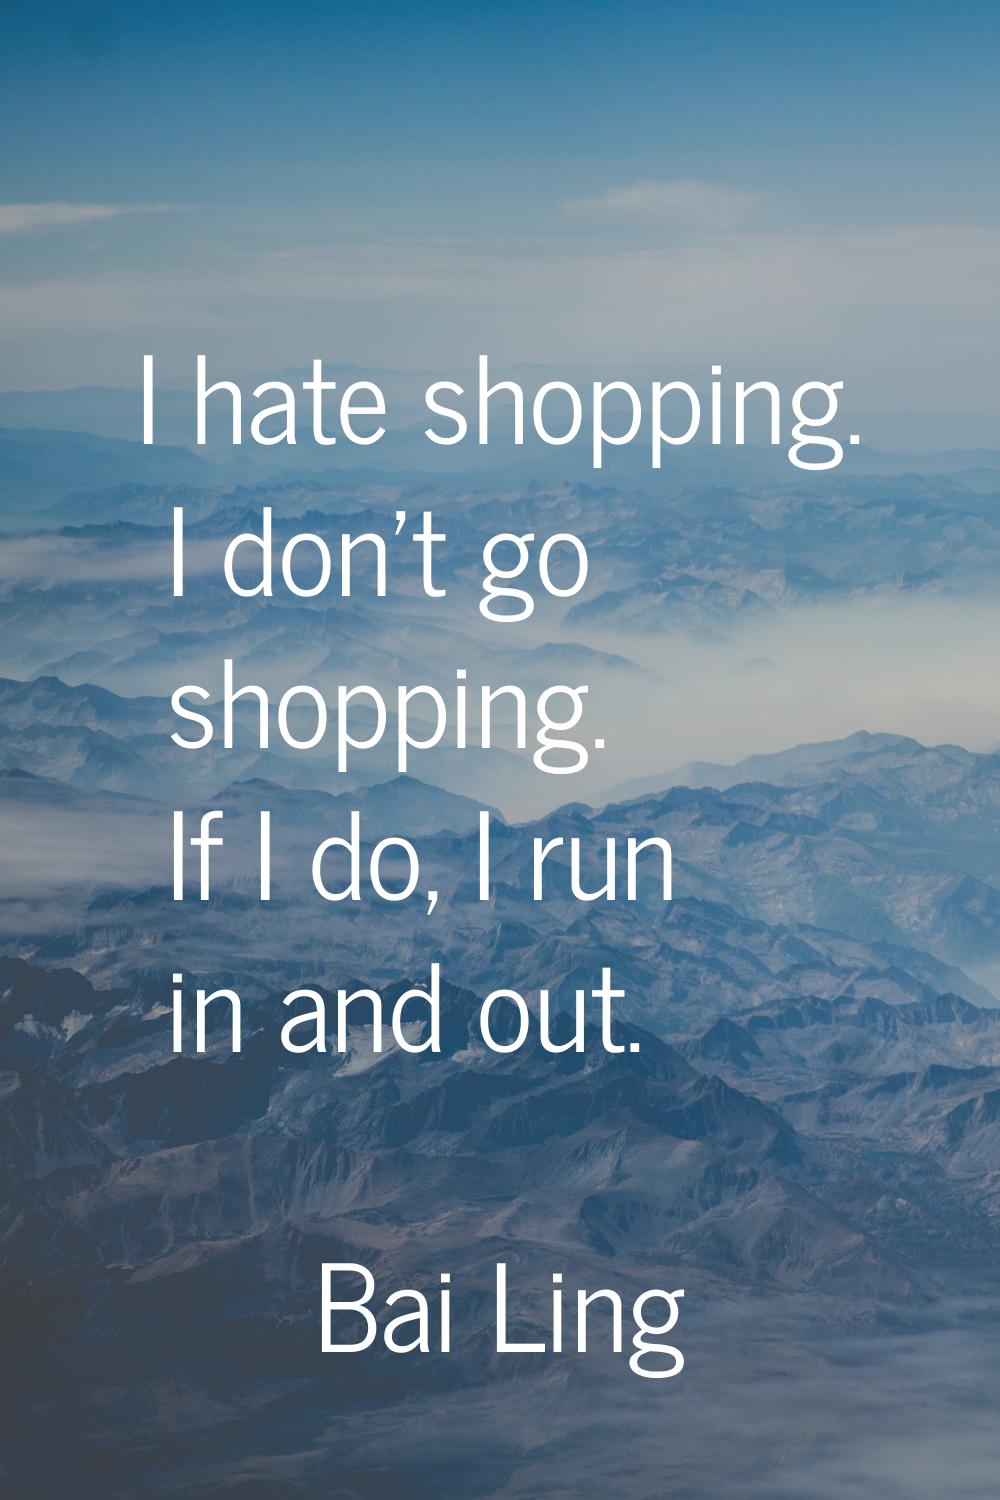 I hate shopping. I don't go shopping. If I do, I run in and out.